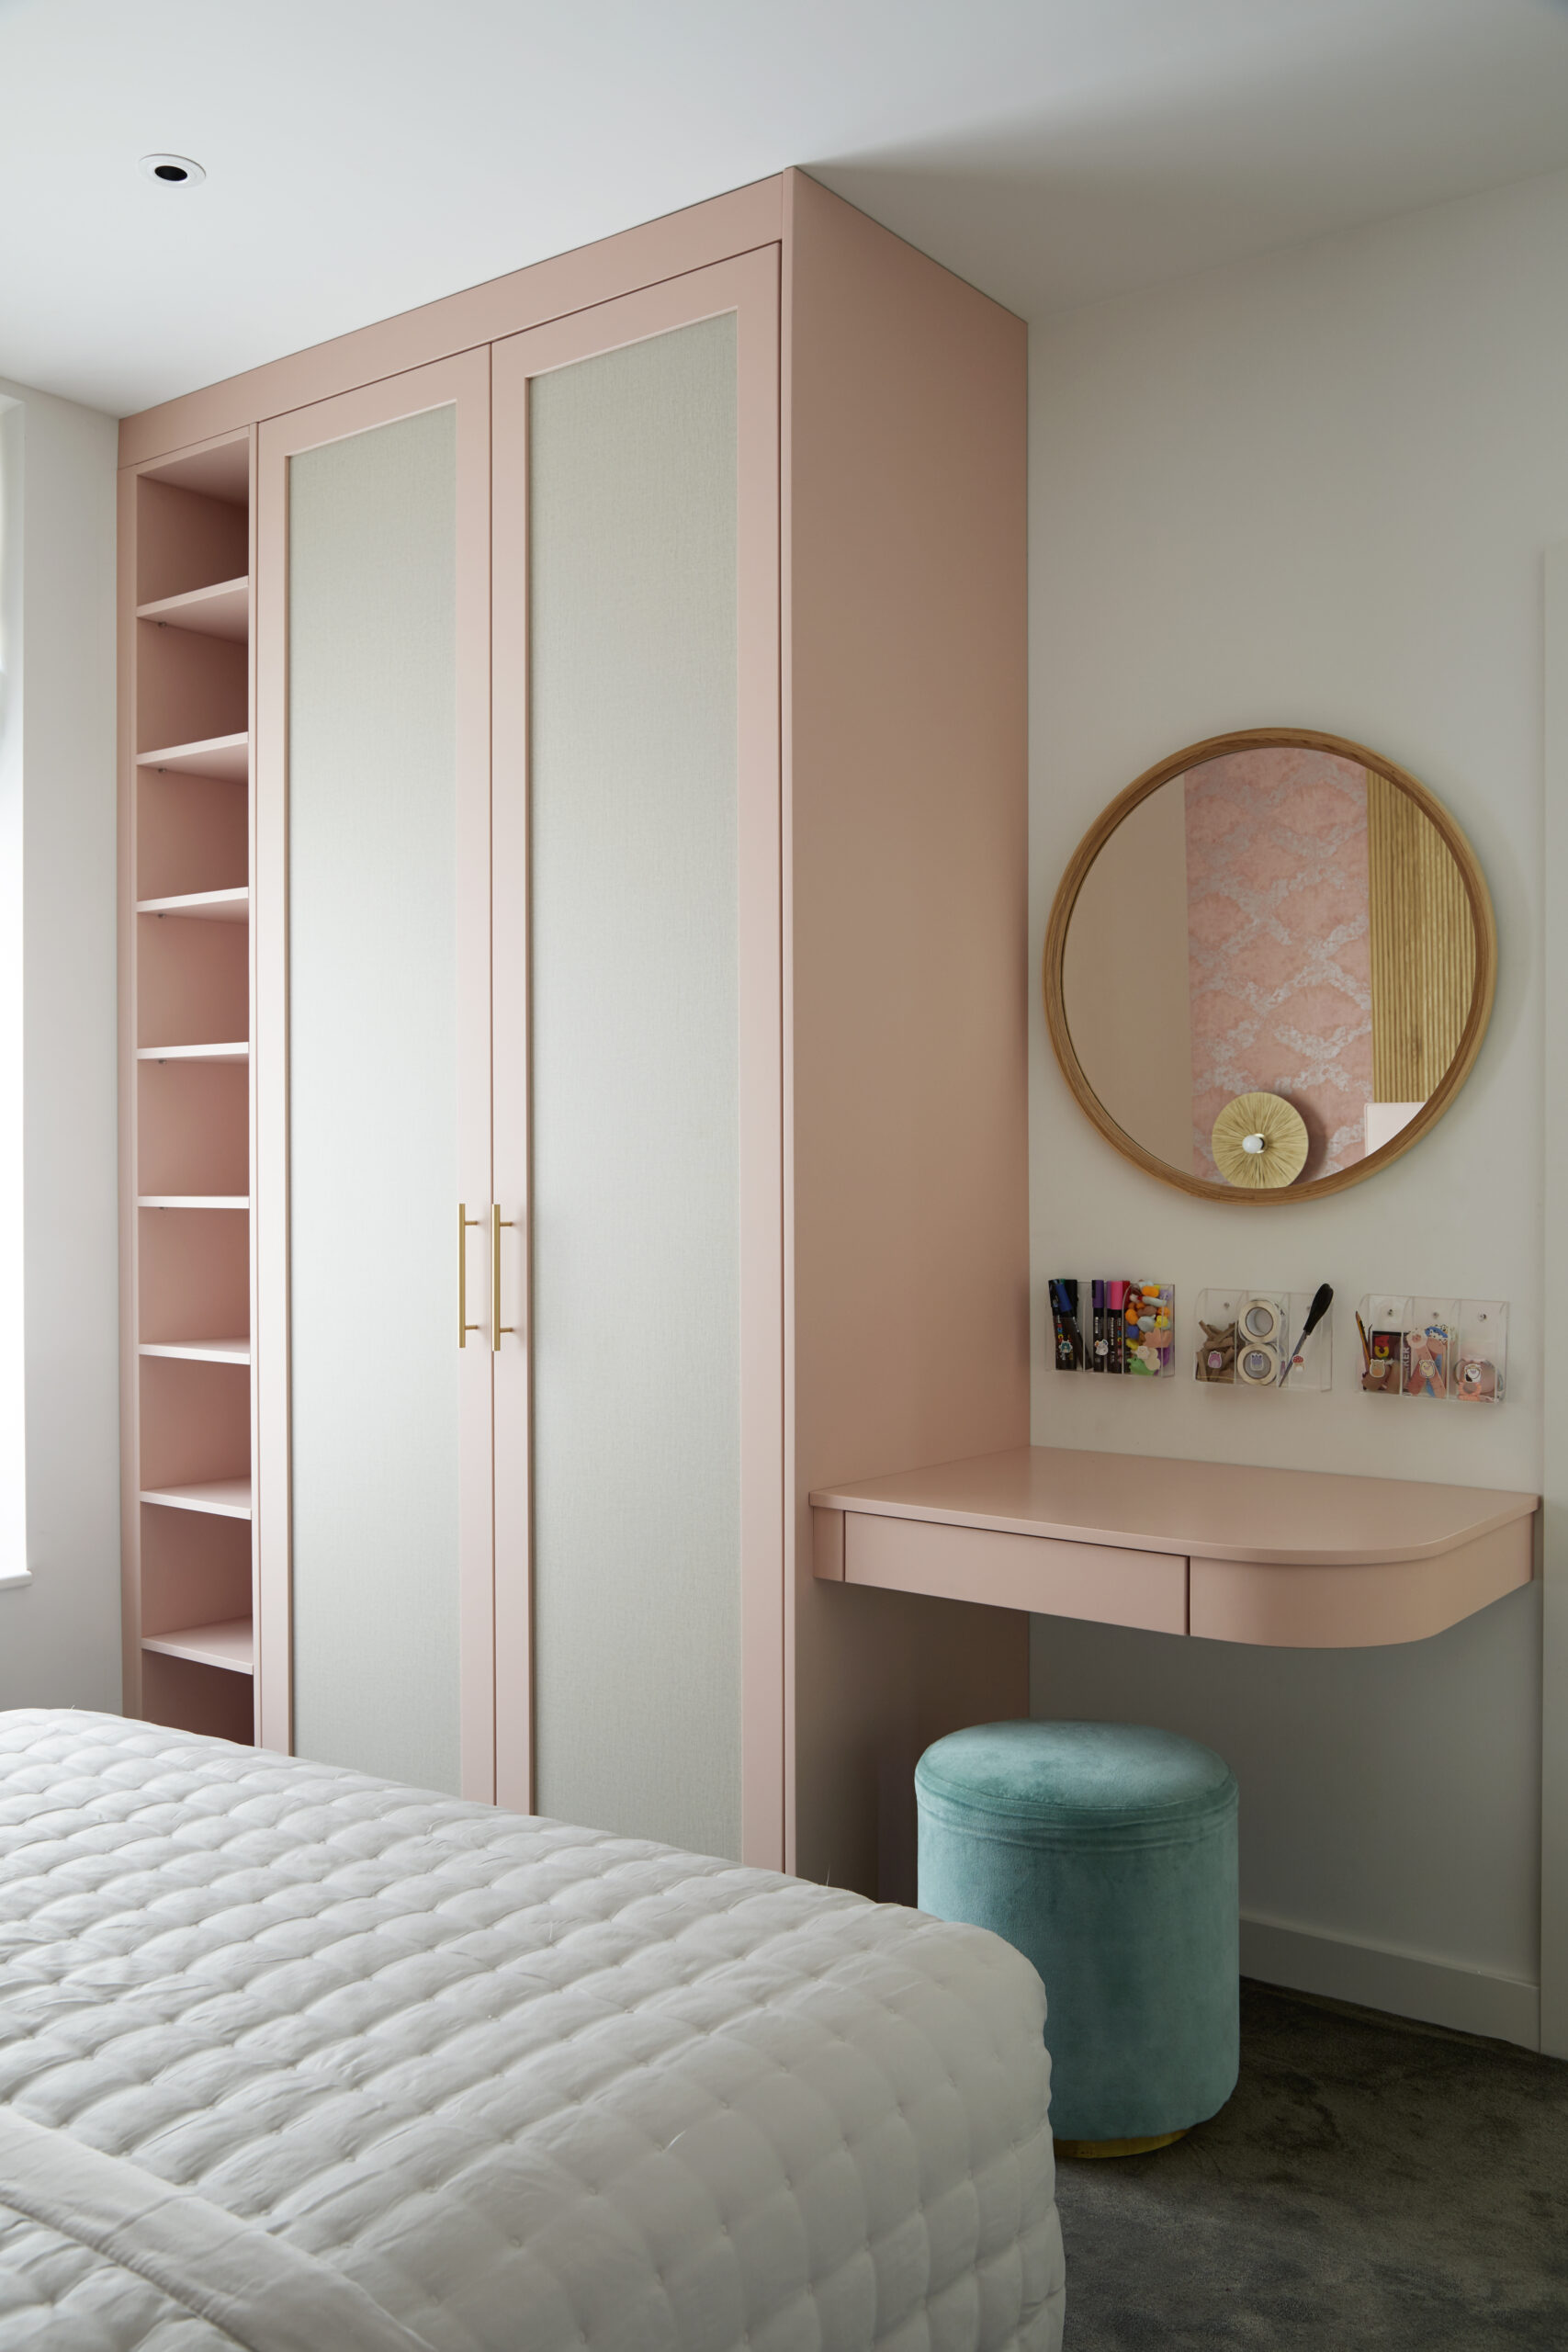 Bespoke joinery in a child's bedroom in a Westminster family apartment.